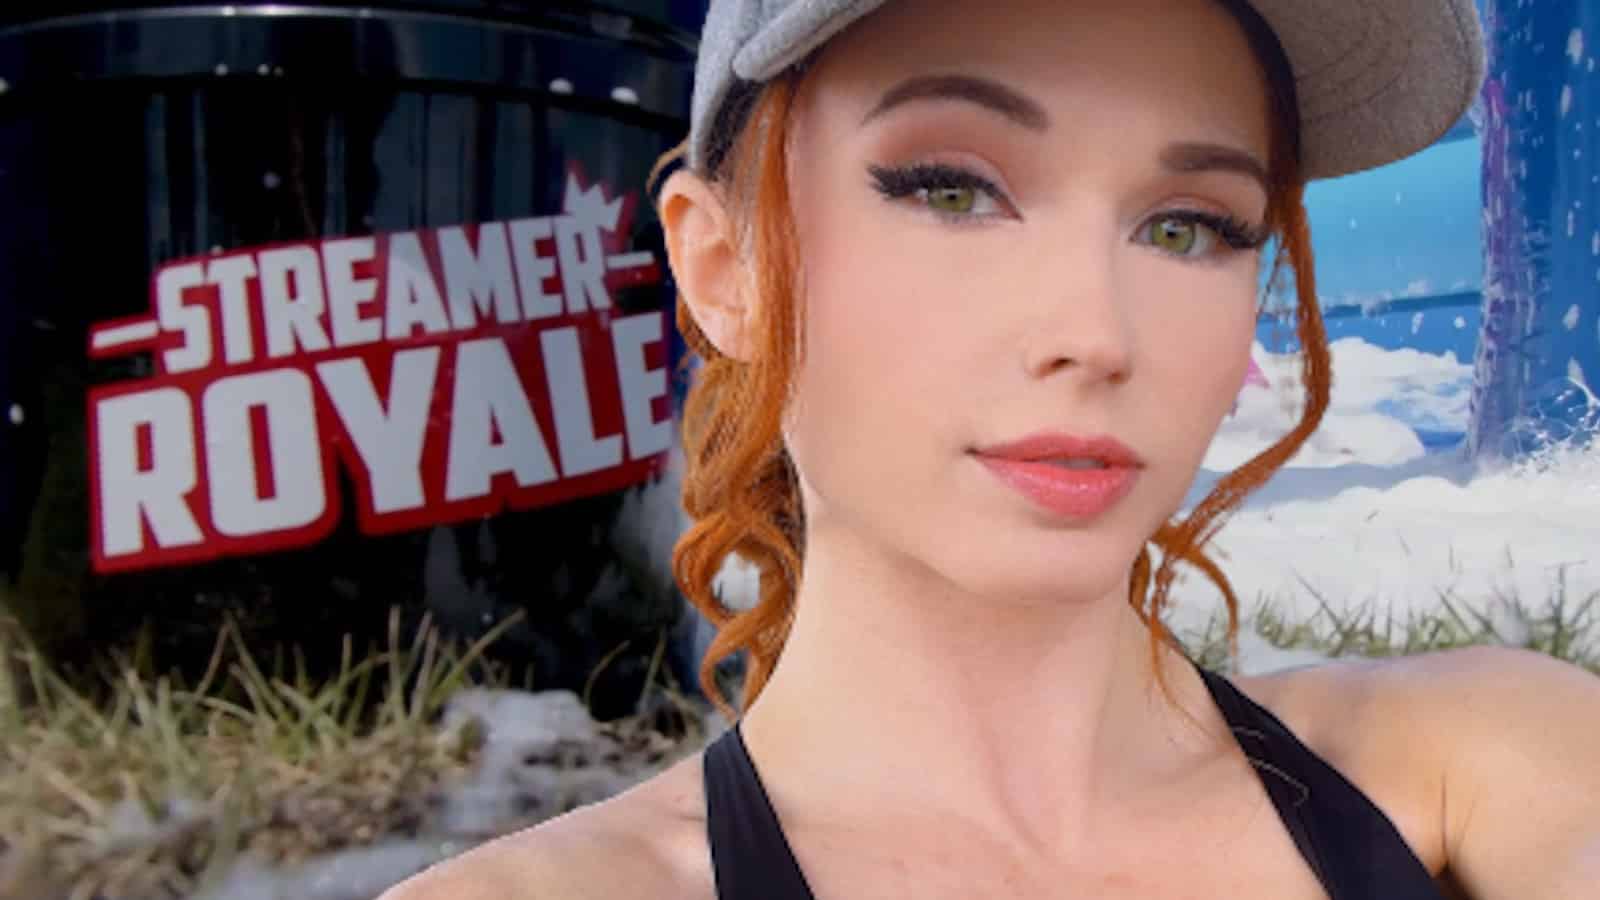 Amouranth streamer royale show